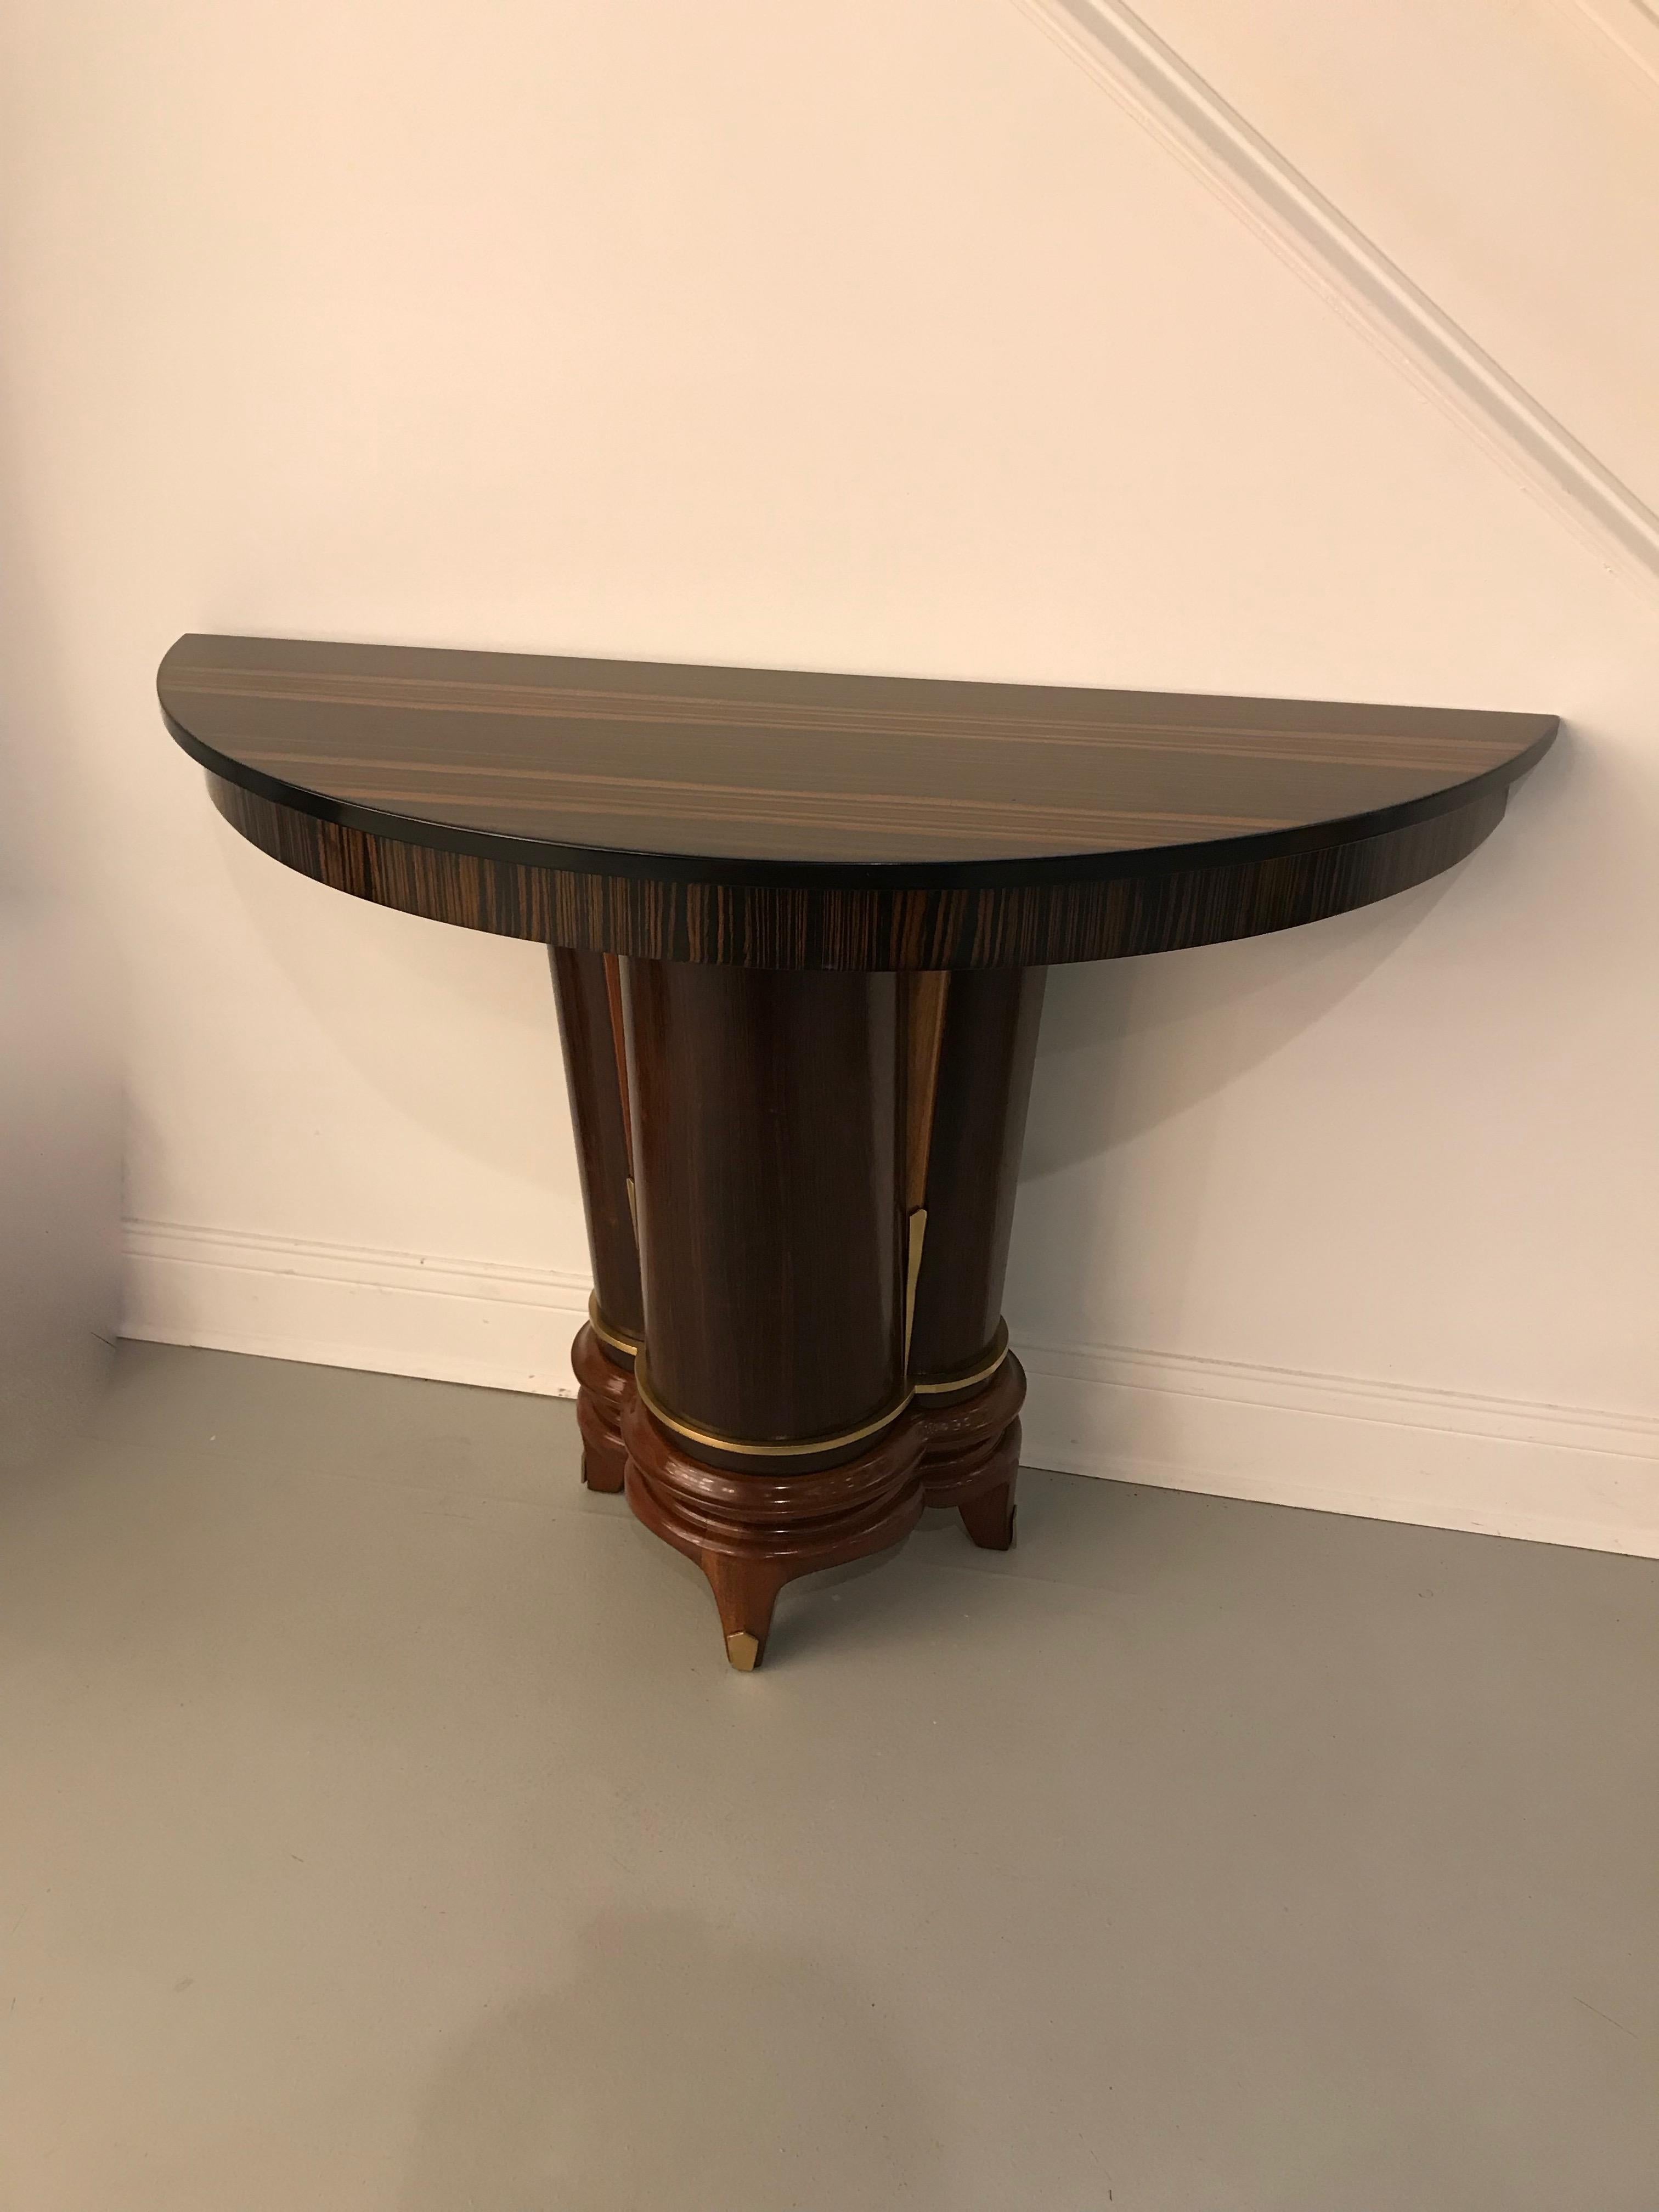 20th Century French Art Deco Macassar Console Table